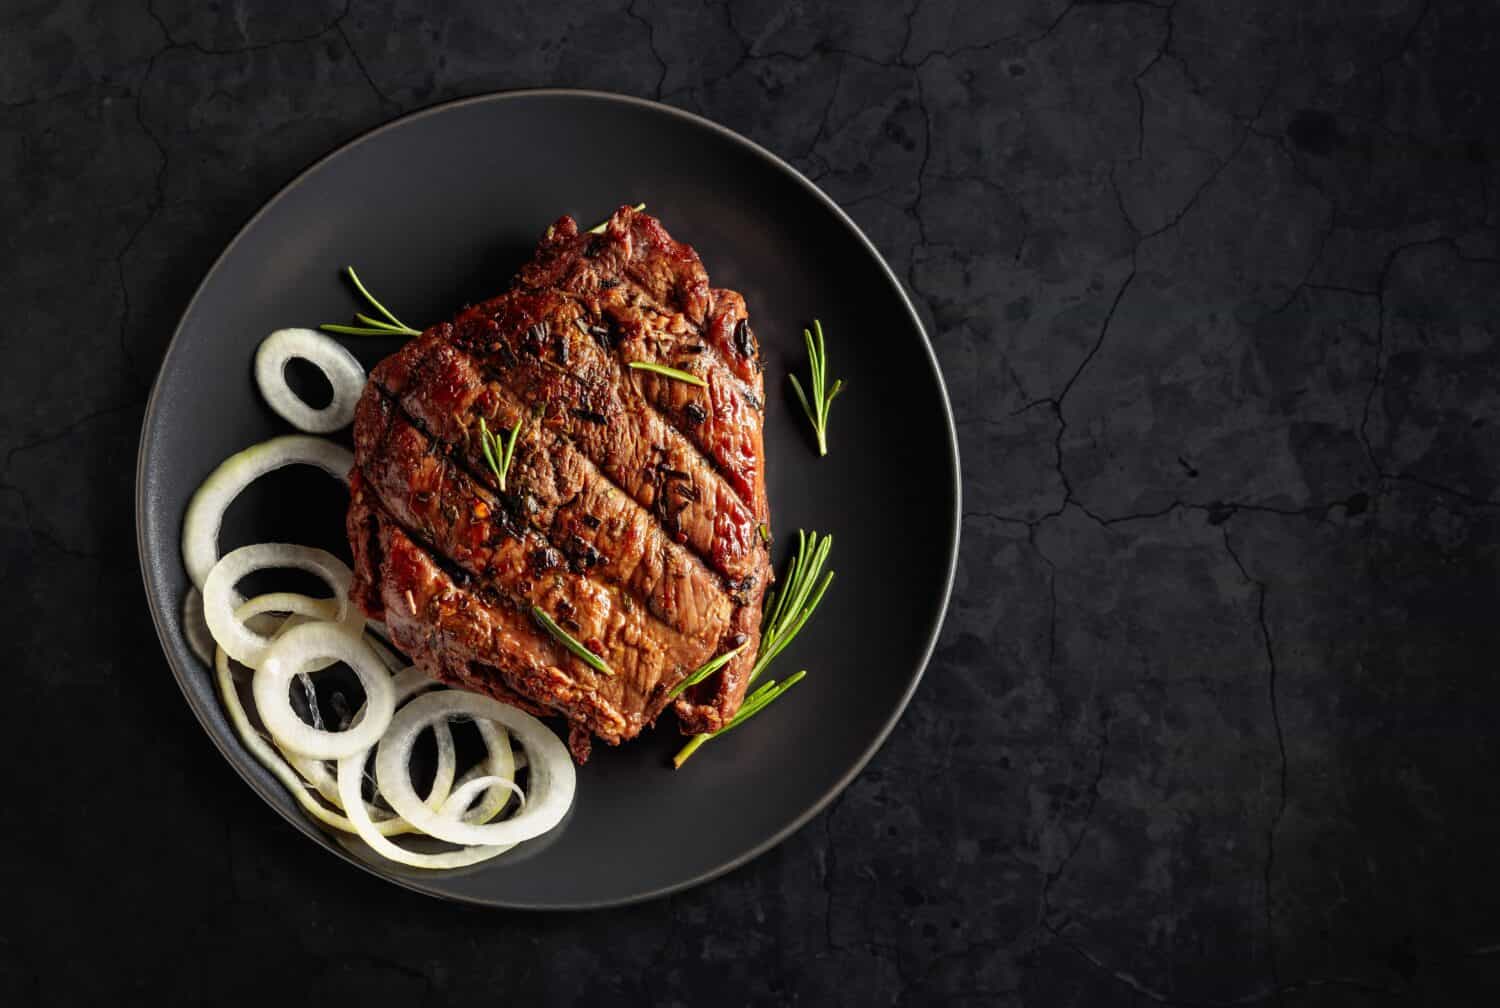 Grilled ribeye beef steak with rosemary and marinated onion on a black stone table. Copy space.